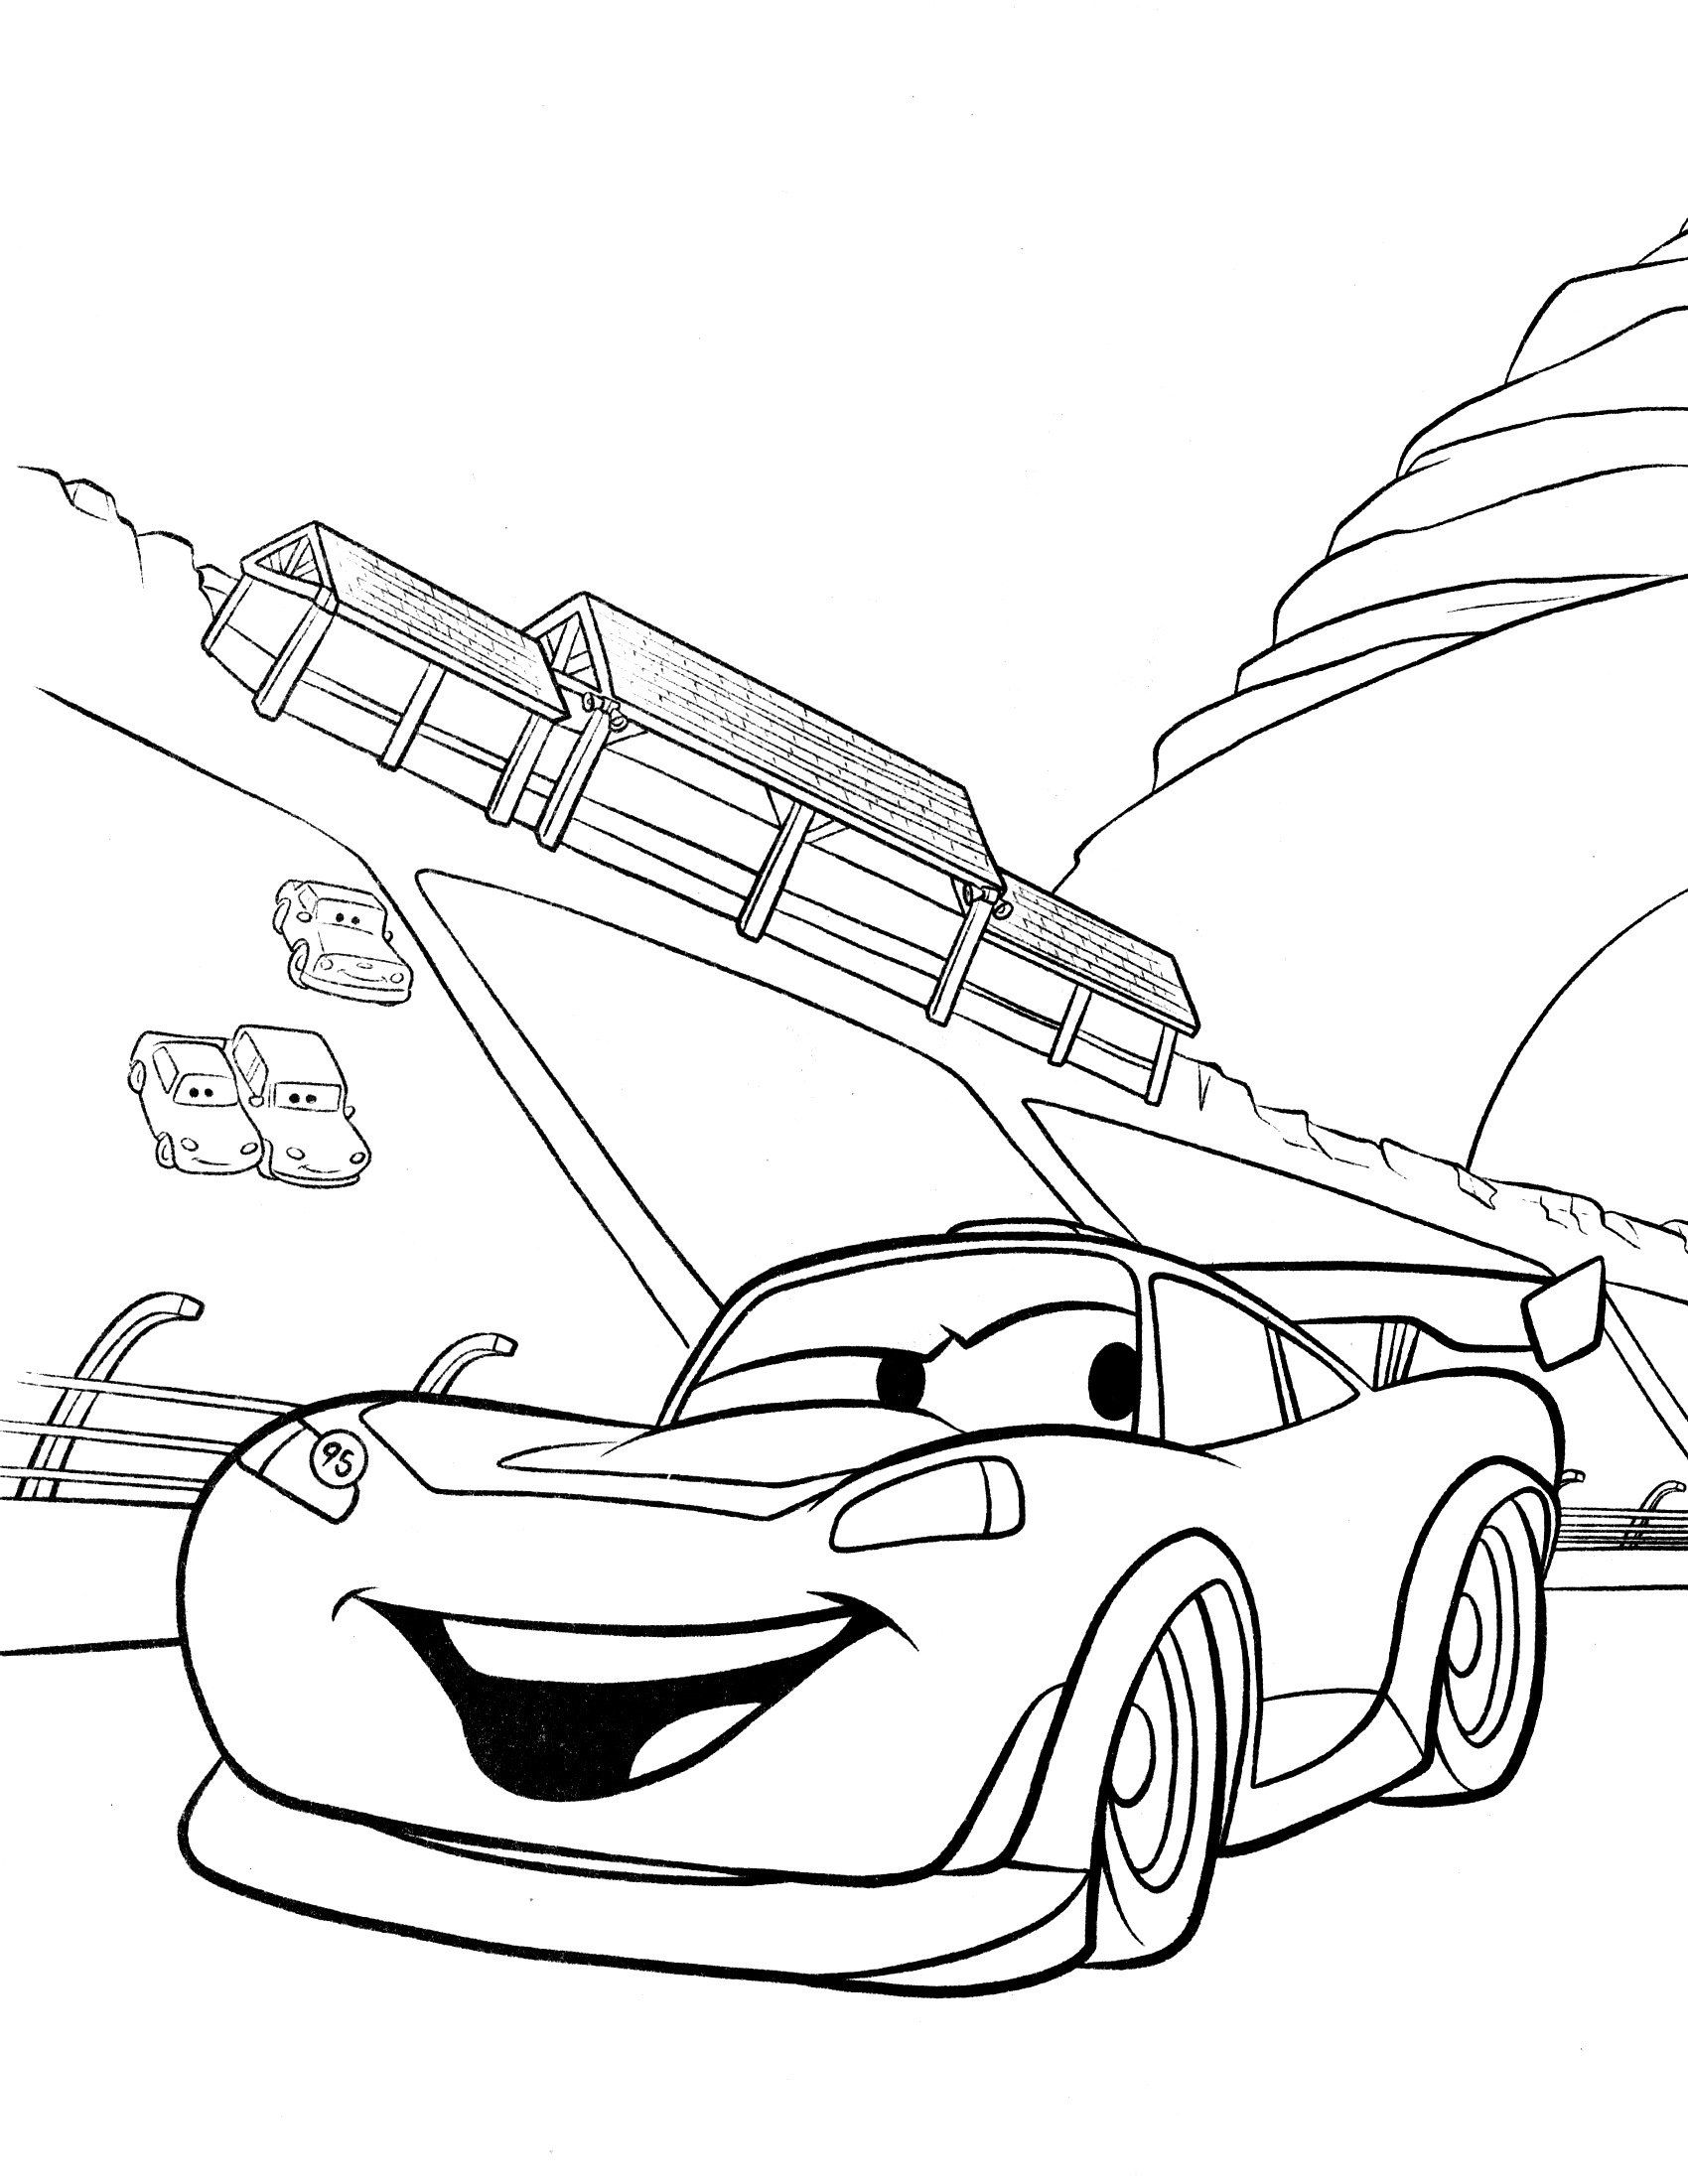 car-coloring-pages-at-getcolorings-free-printable-colorings-pages-to-print-and-color